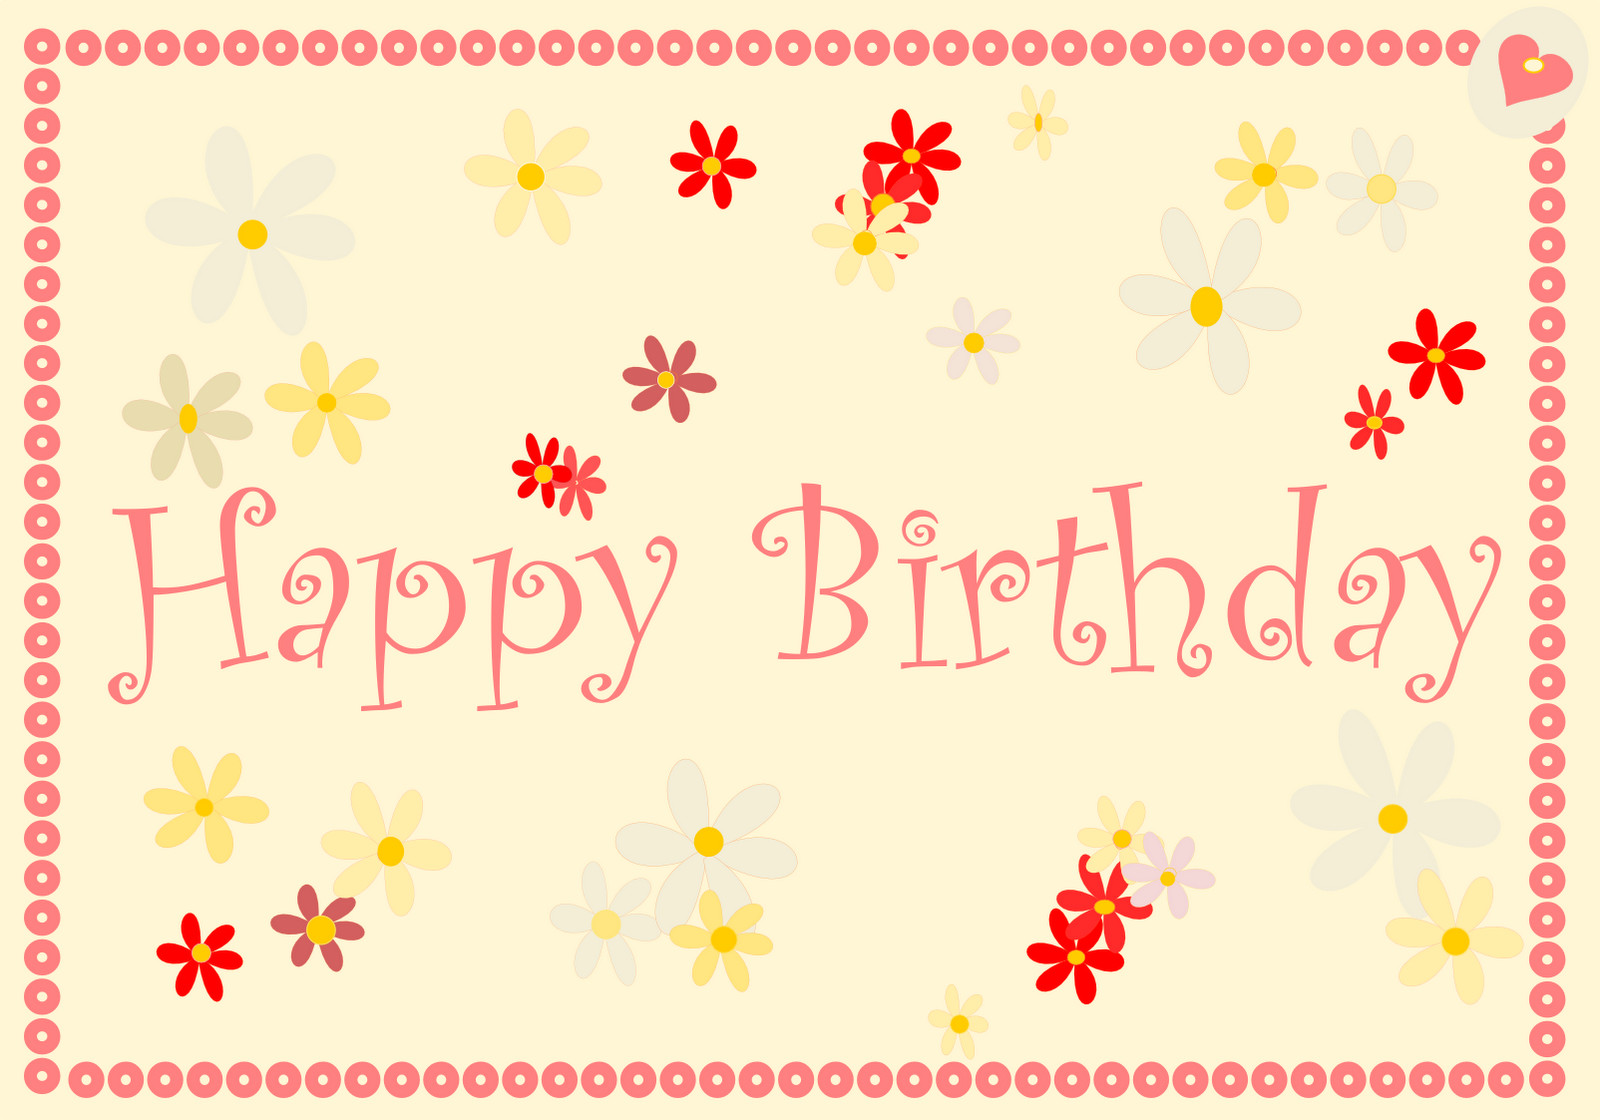 Free Download Birthday Cards
 35 Happy Birthday Cards Free To Download – The WoW Style